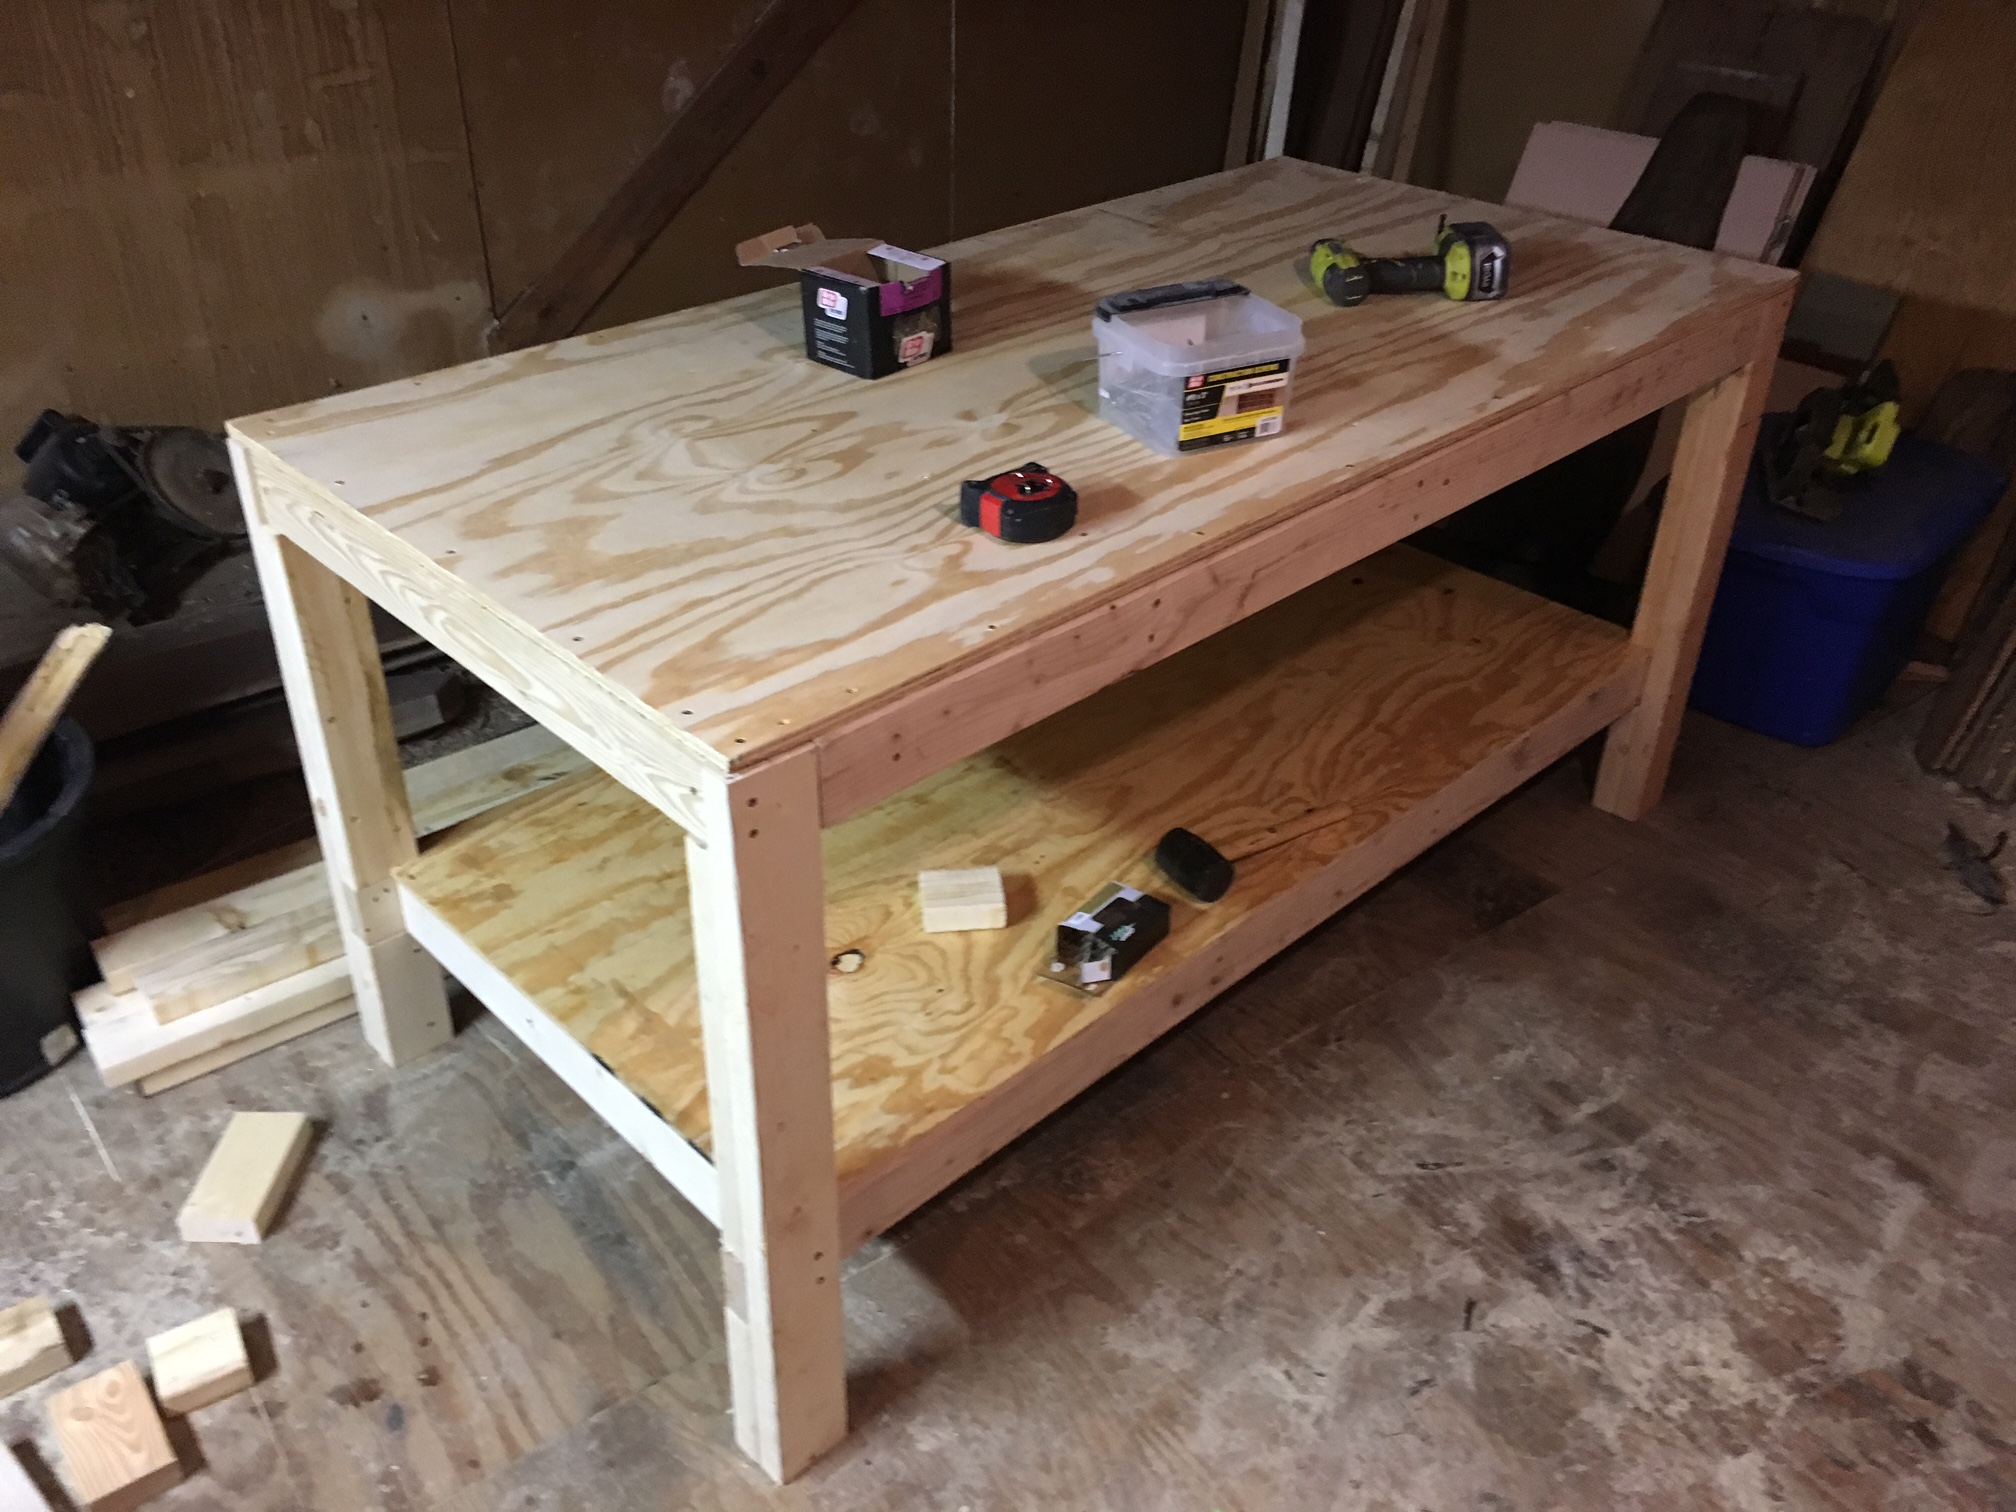 Woodworking and table